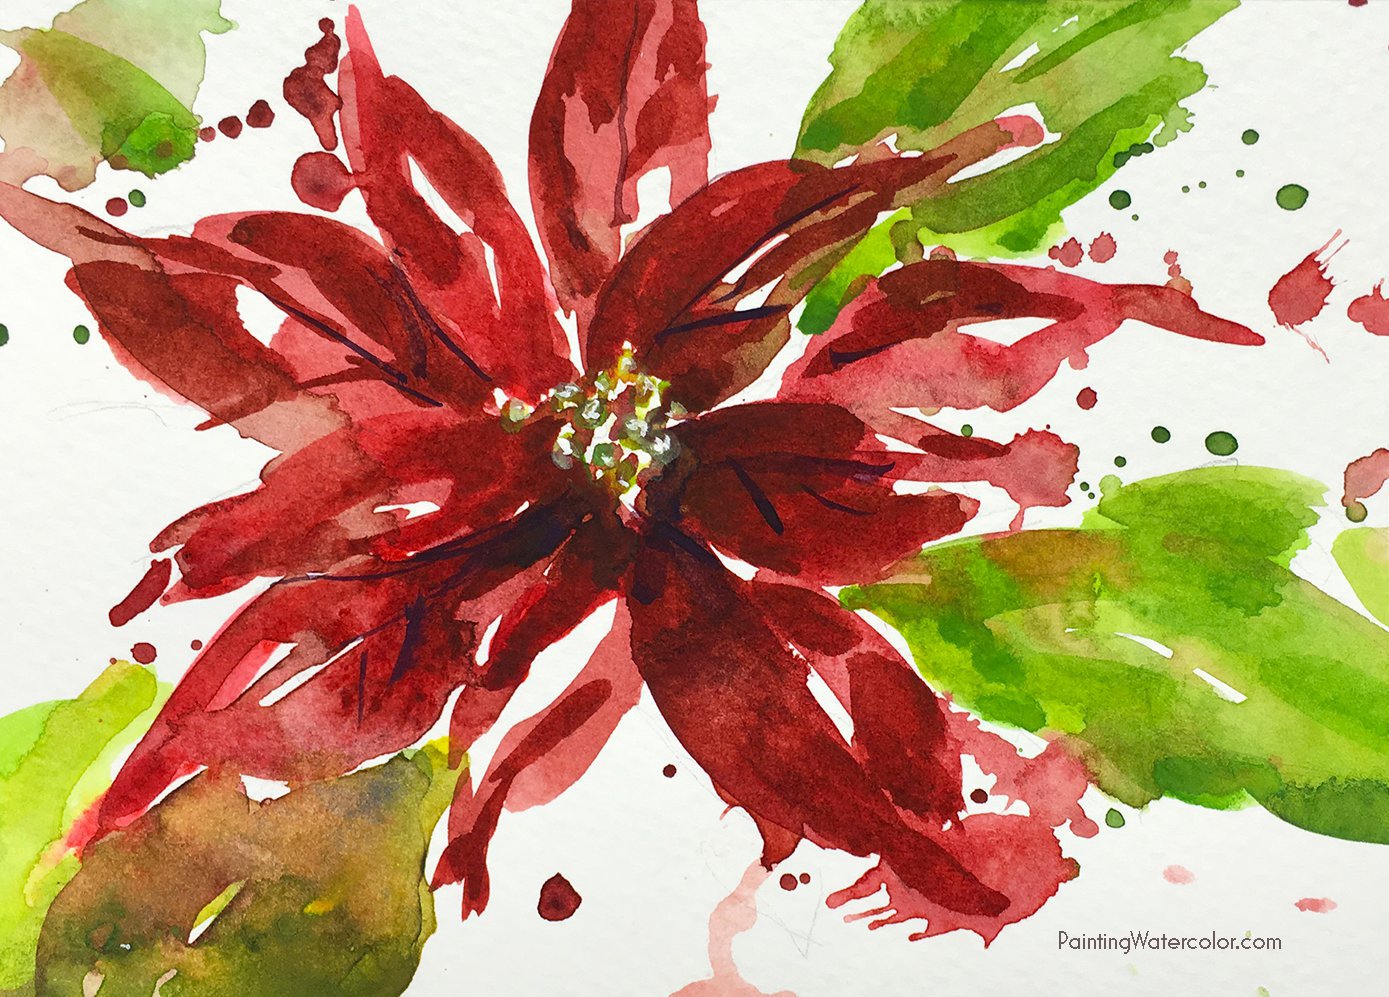 hand-painted-greeting-cards-with-flowers-in-2019-watercolor-art